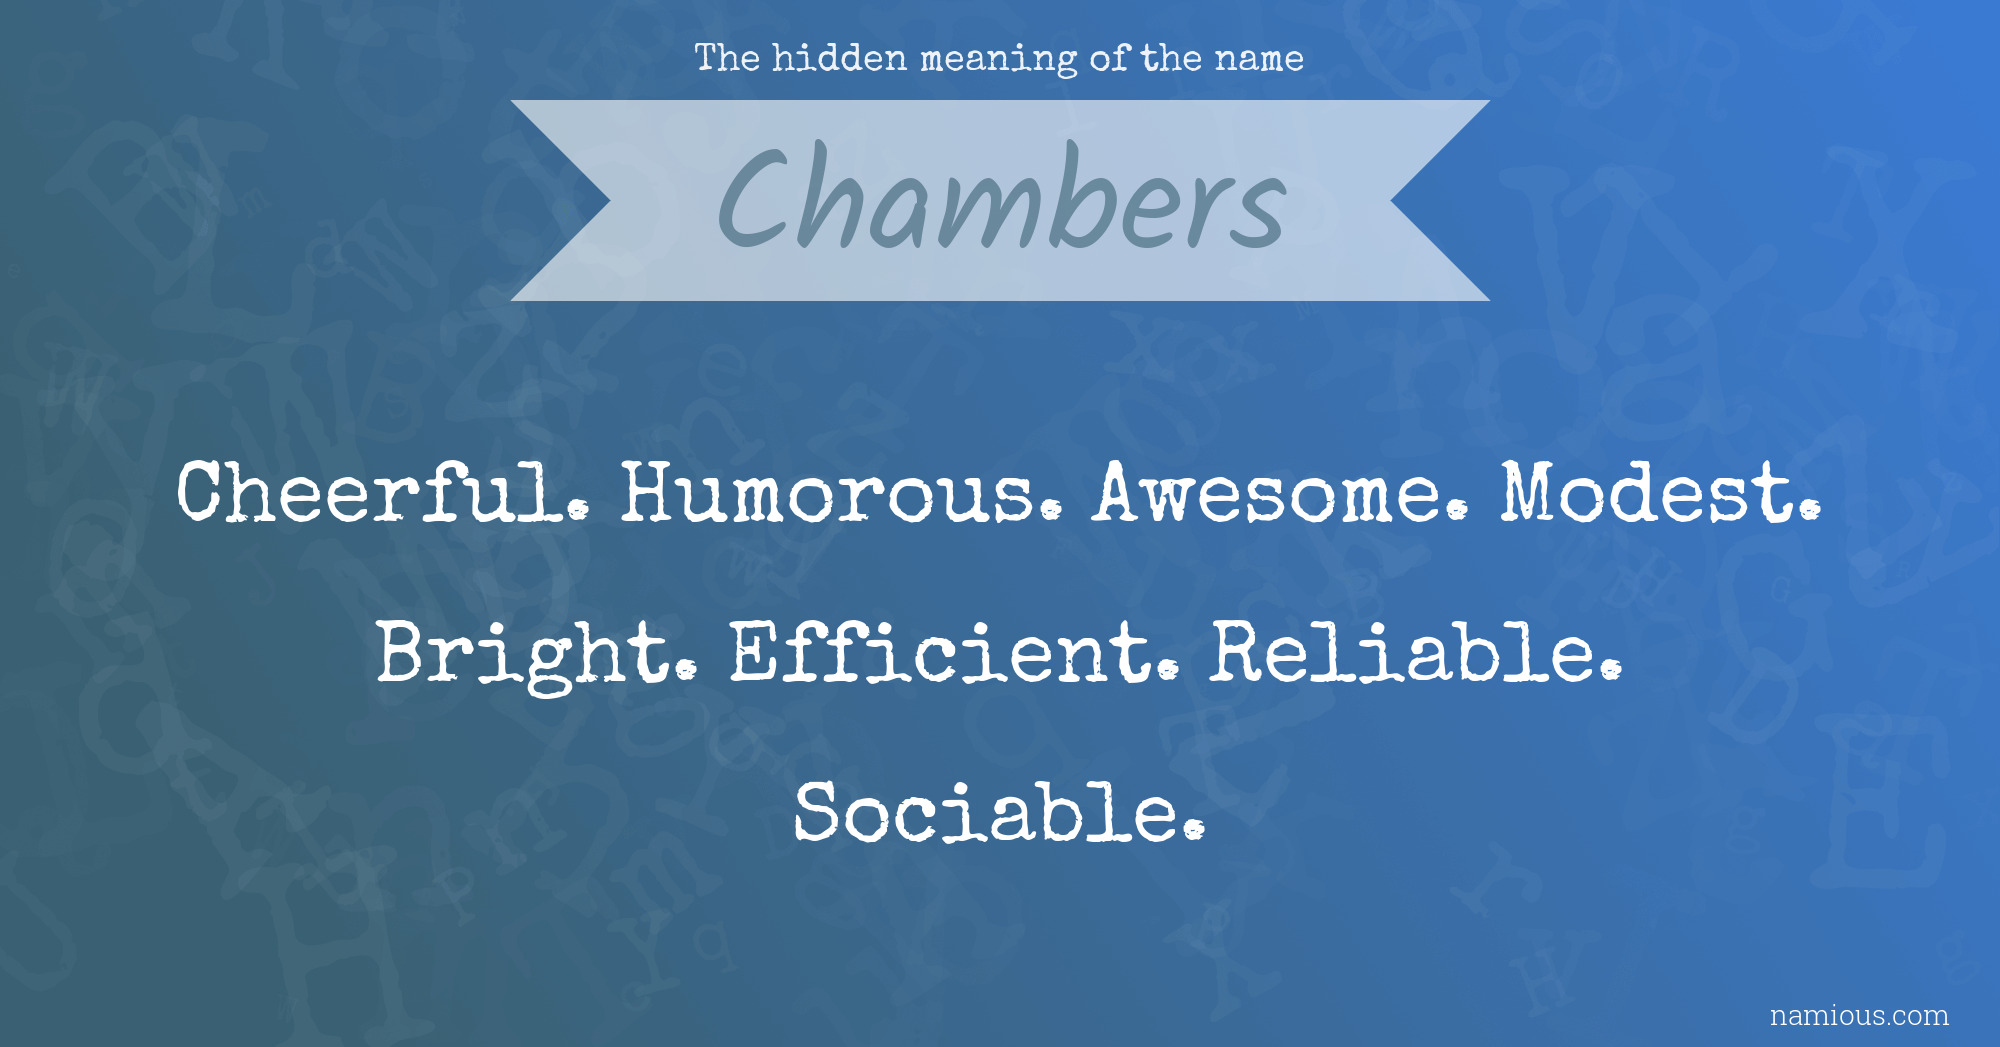 The hidden meaning of the name Chambers